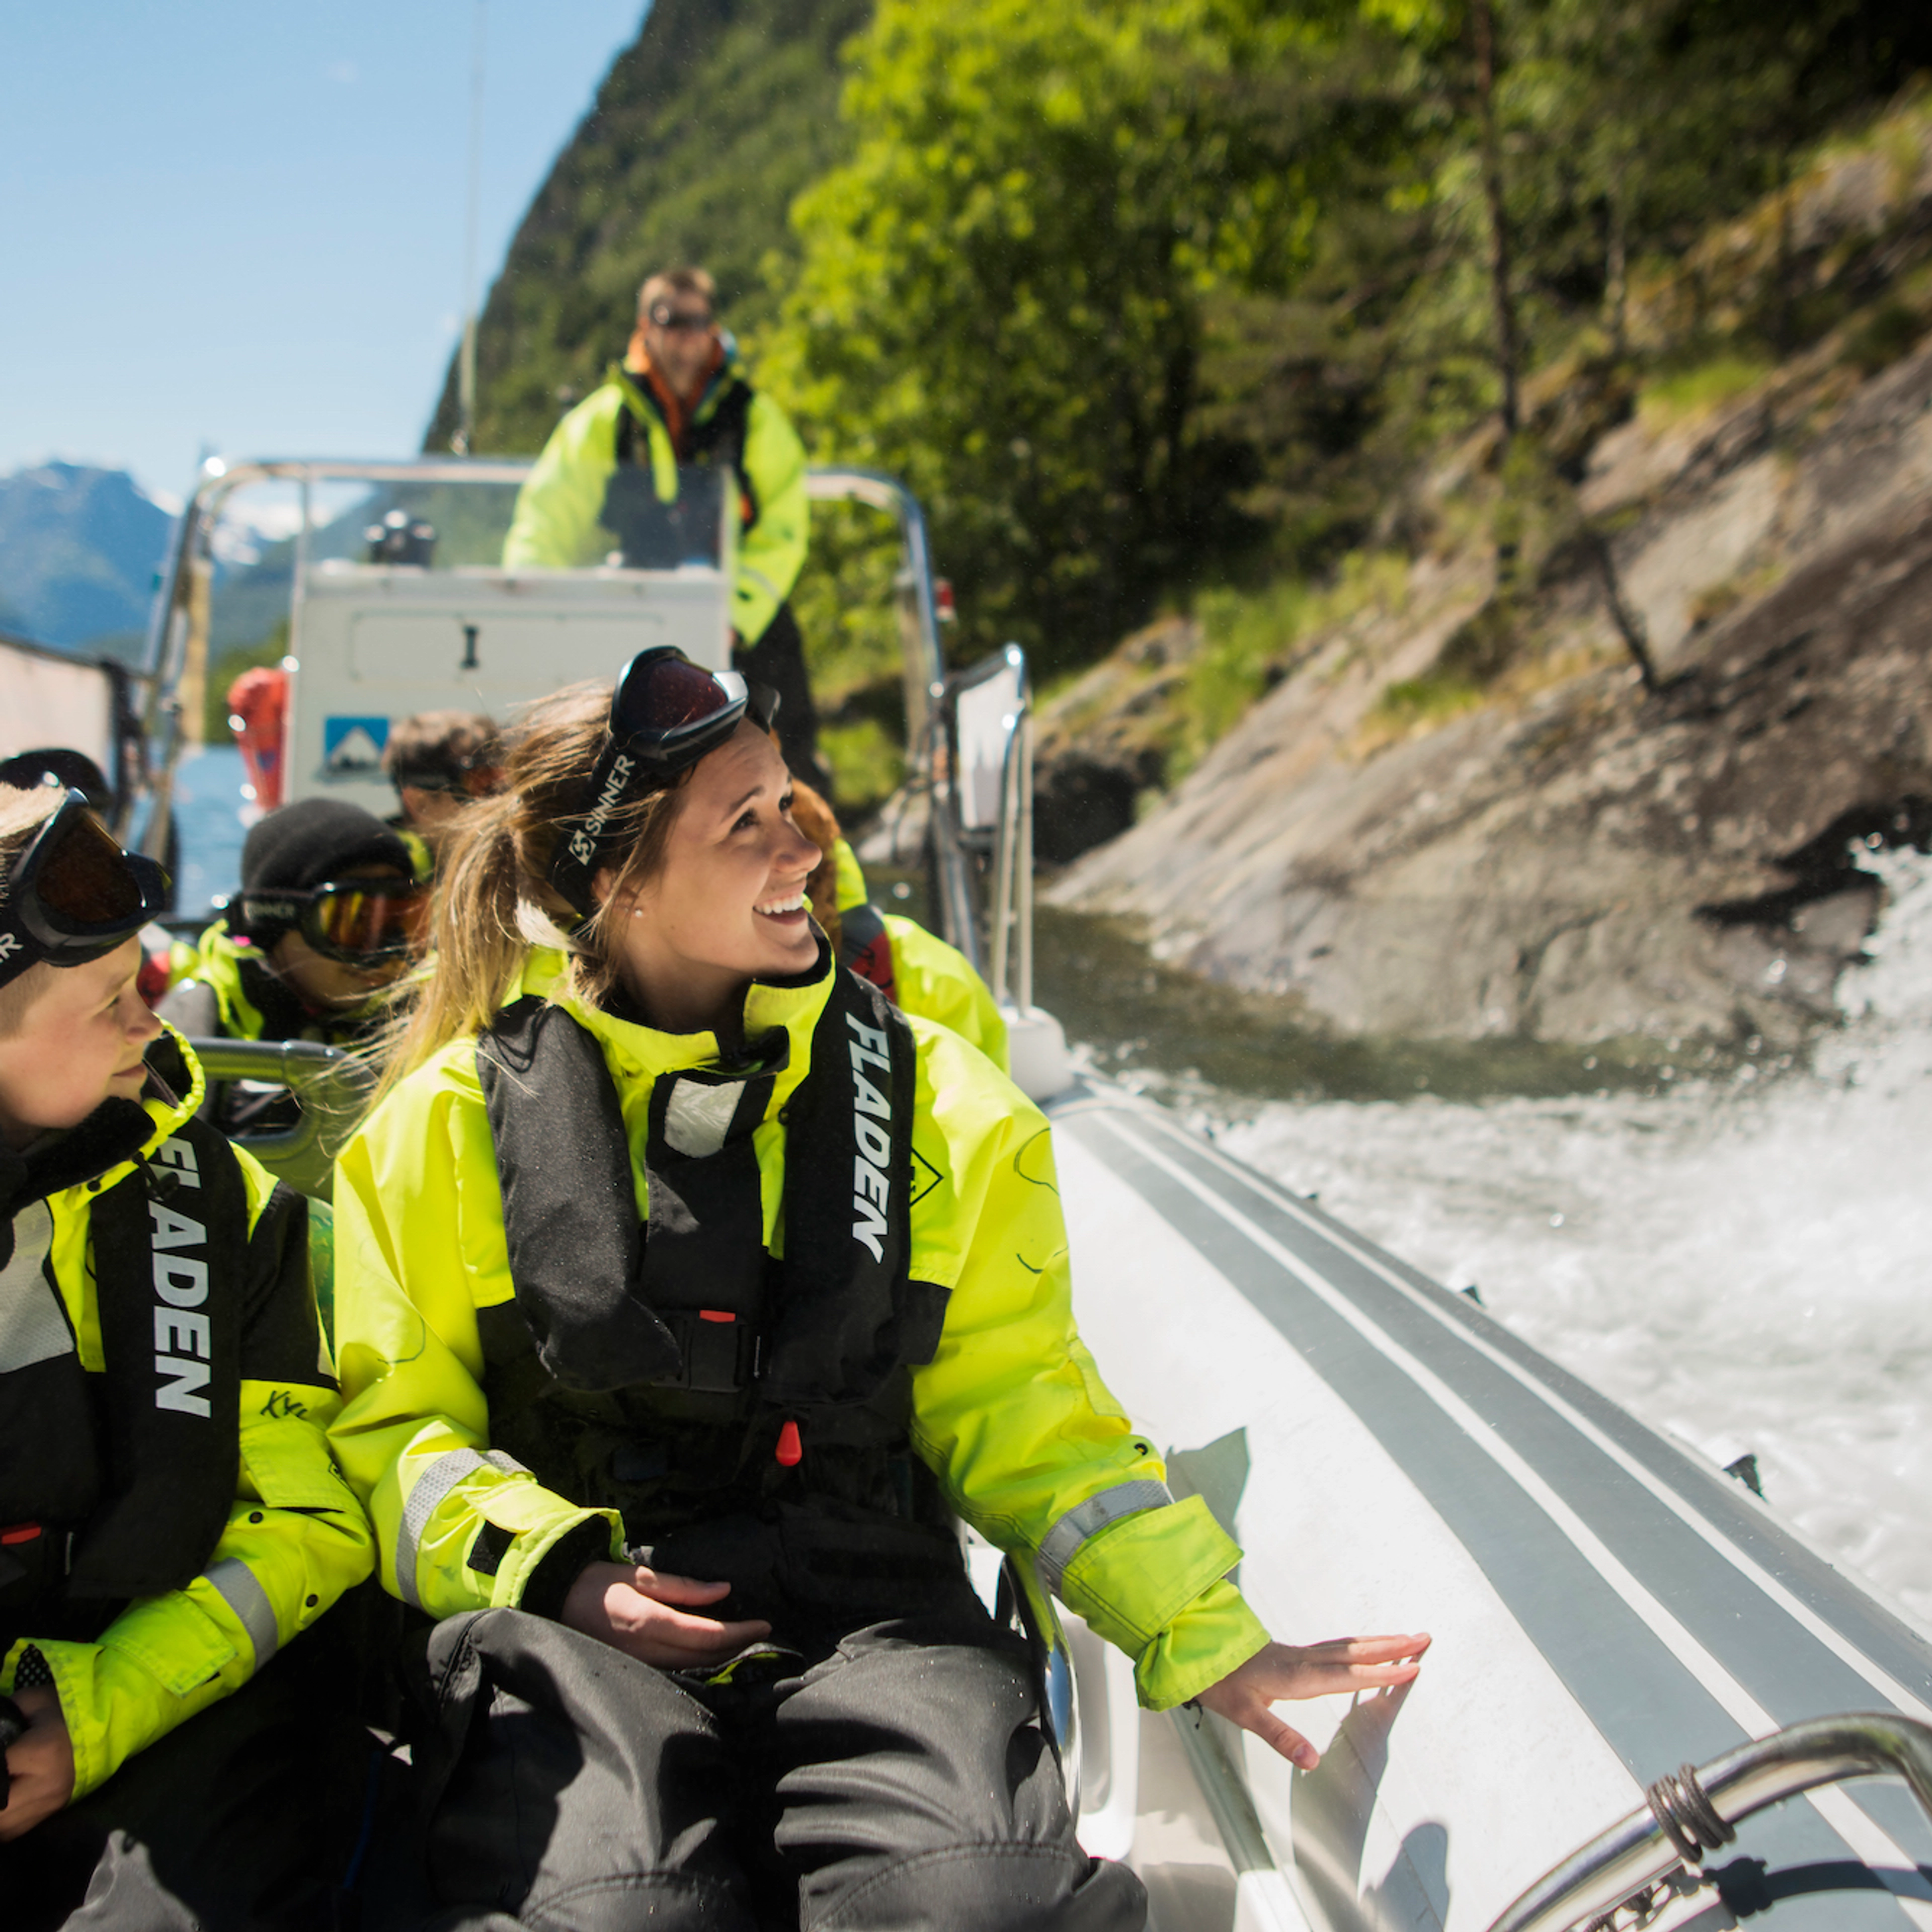 Fjord safari with kids in Flåm - Norway, Norway in a nutshell® Family